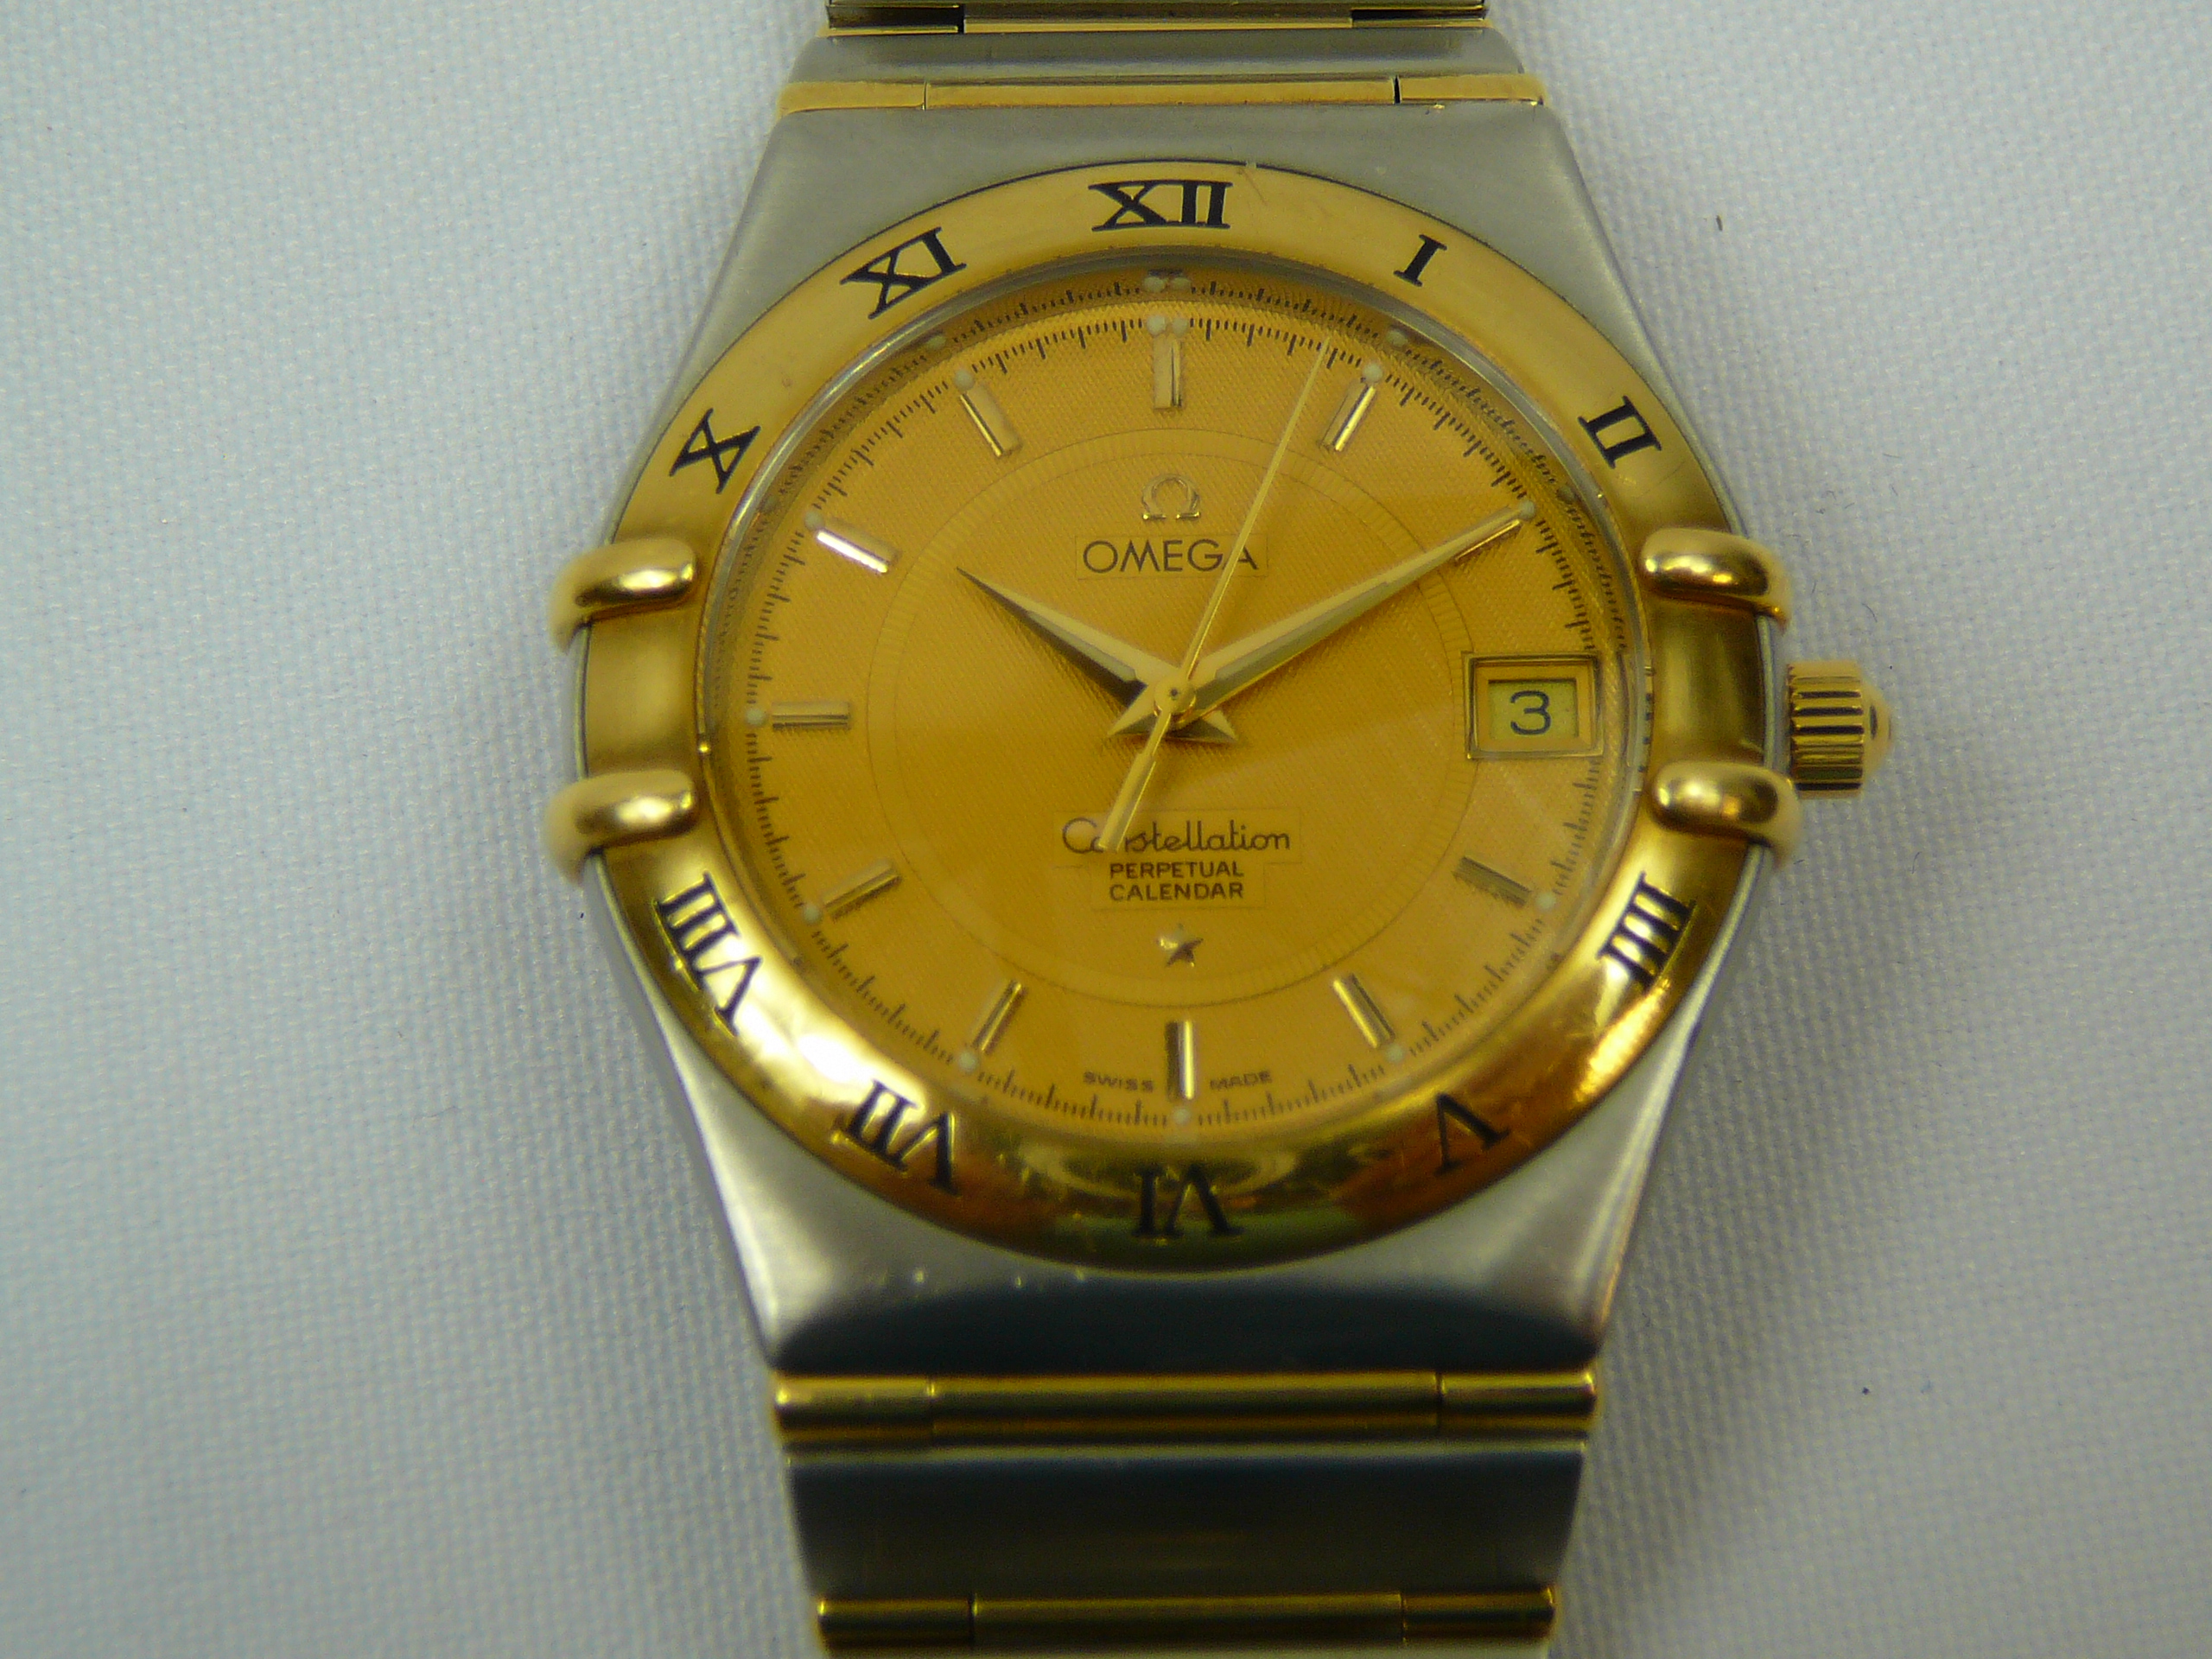 Gents Omega Wrist Watch - Image 3 of 4